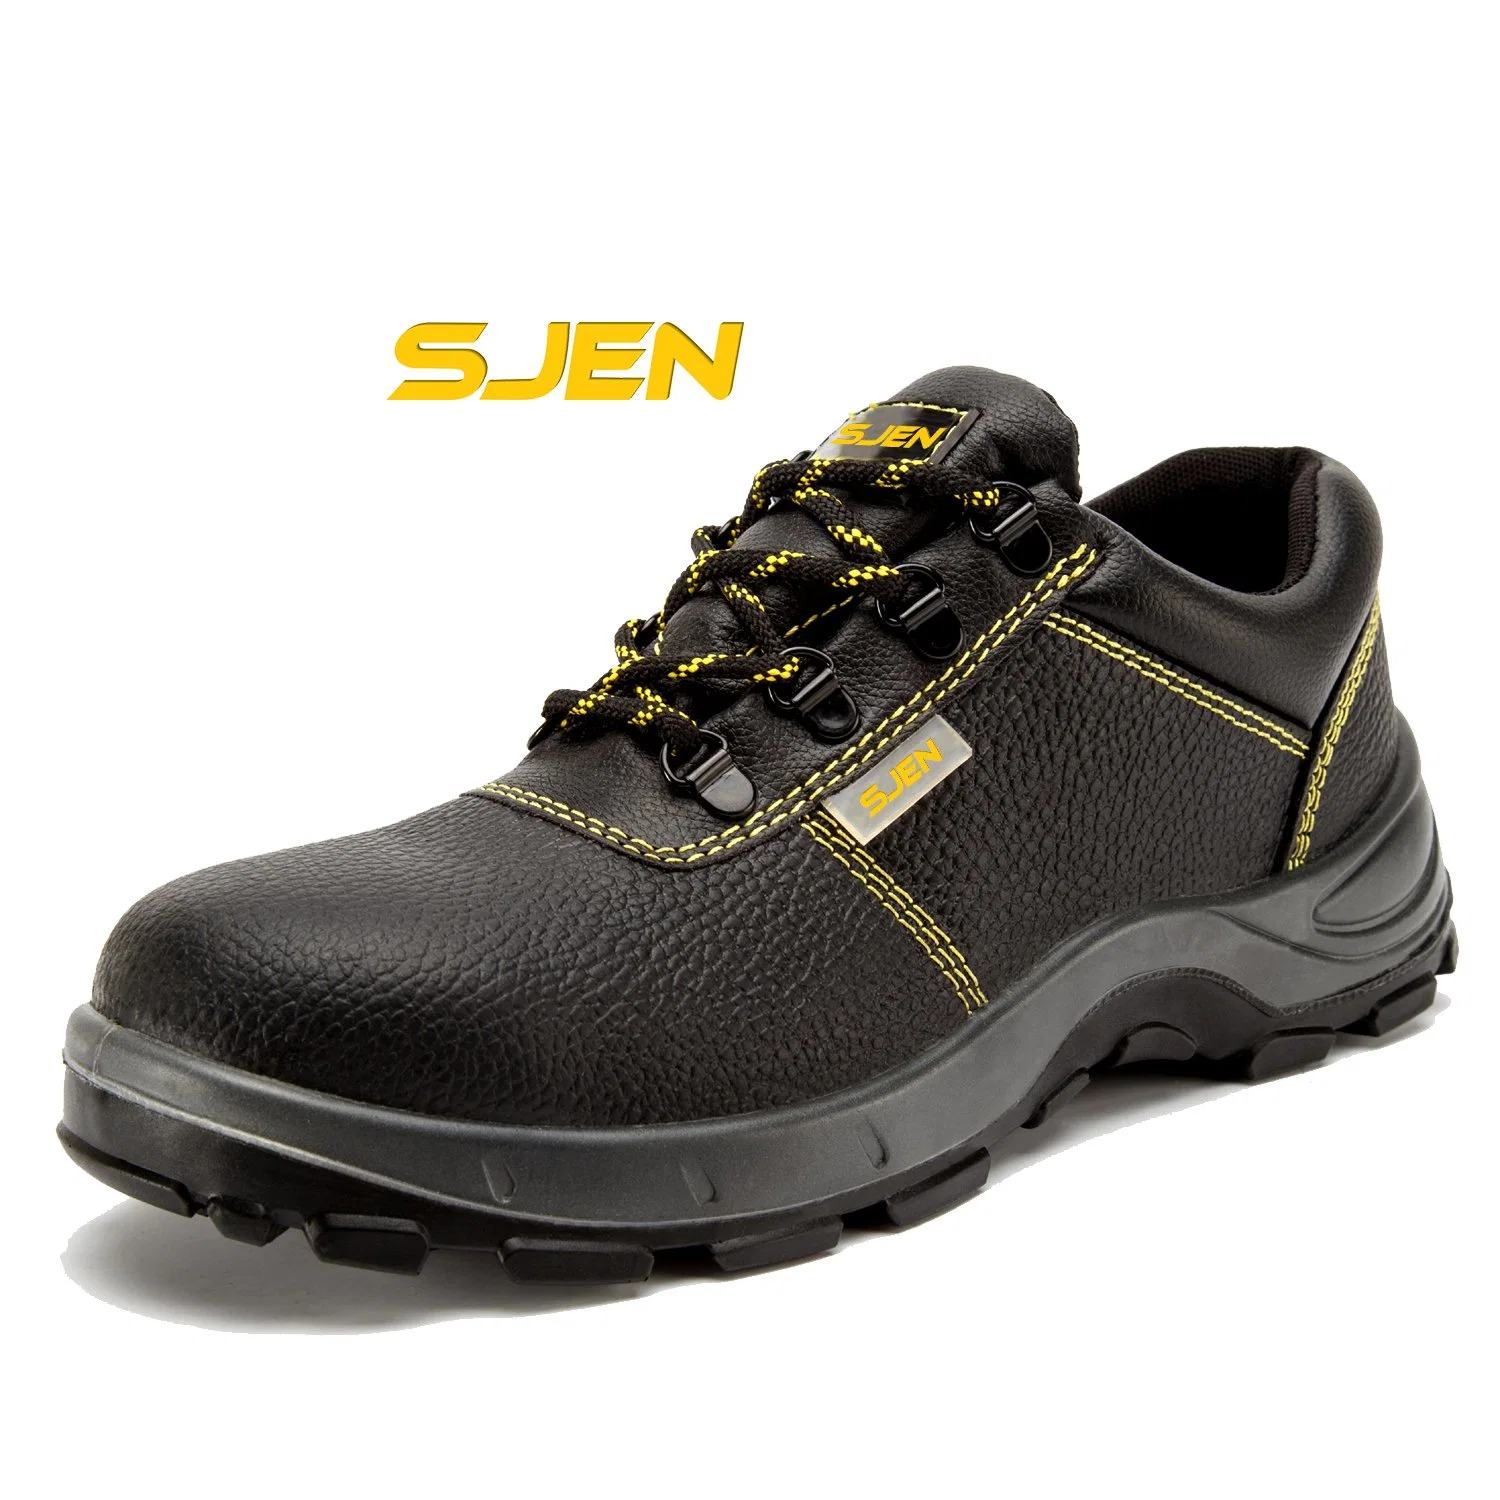 Mg-Ssa003 in Stock Outdoor Low Cut Stylish Safety Shoes with Genuine Leather Upper Safety Working Shoes